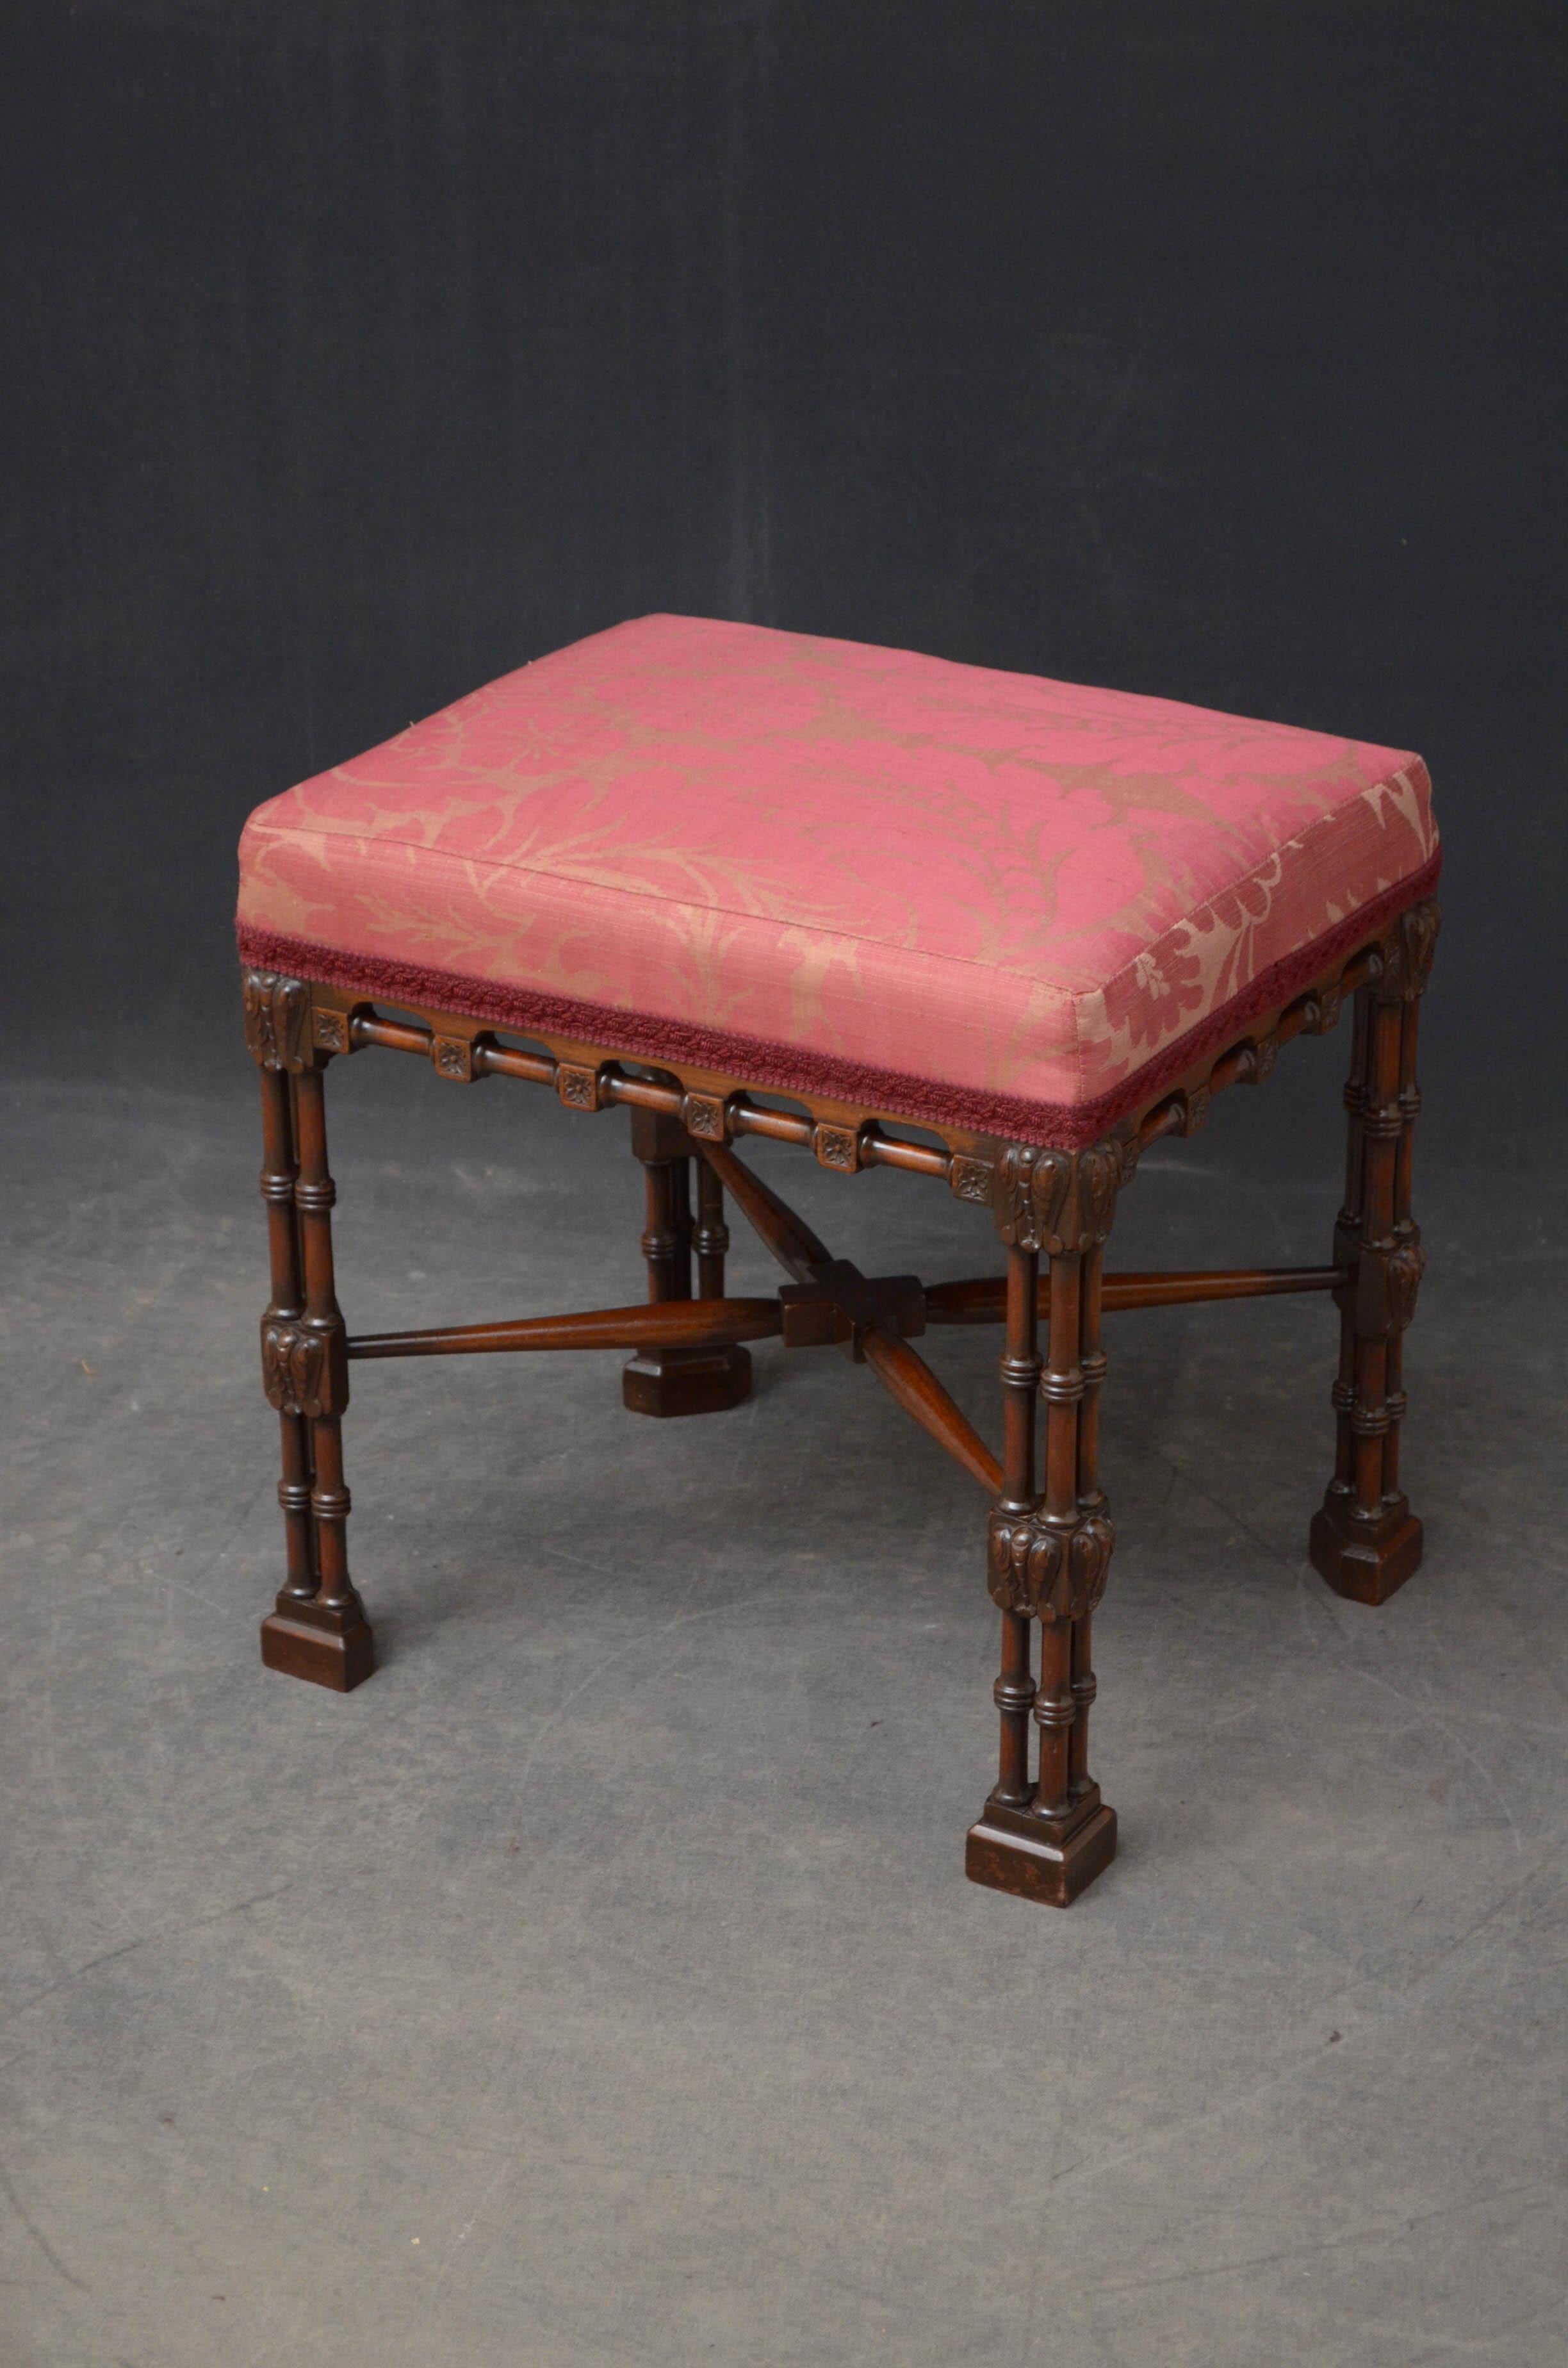 Sn4708 stylish late Victorian Chippendale style stool in mahogany, having rectangular seat with floral pattern fabric above a frieze with flower pateras and turnings, standing on ringed cluster column legs with leafy carvings, all united by turned